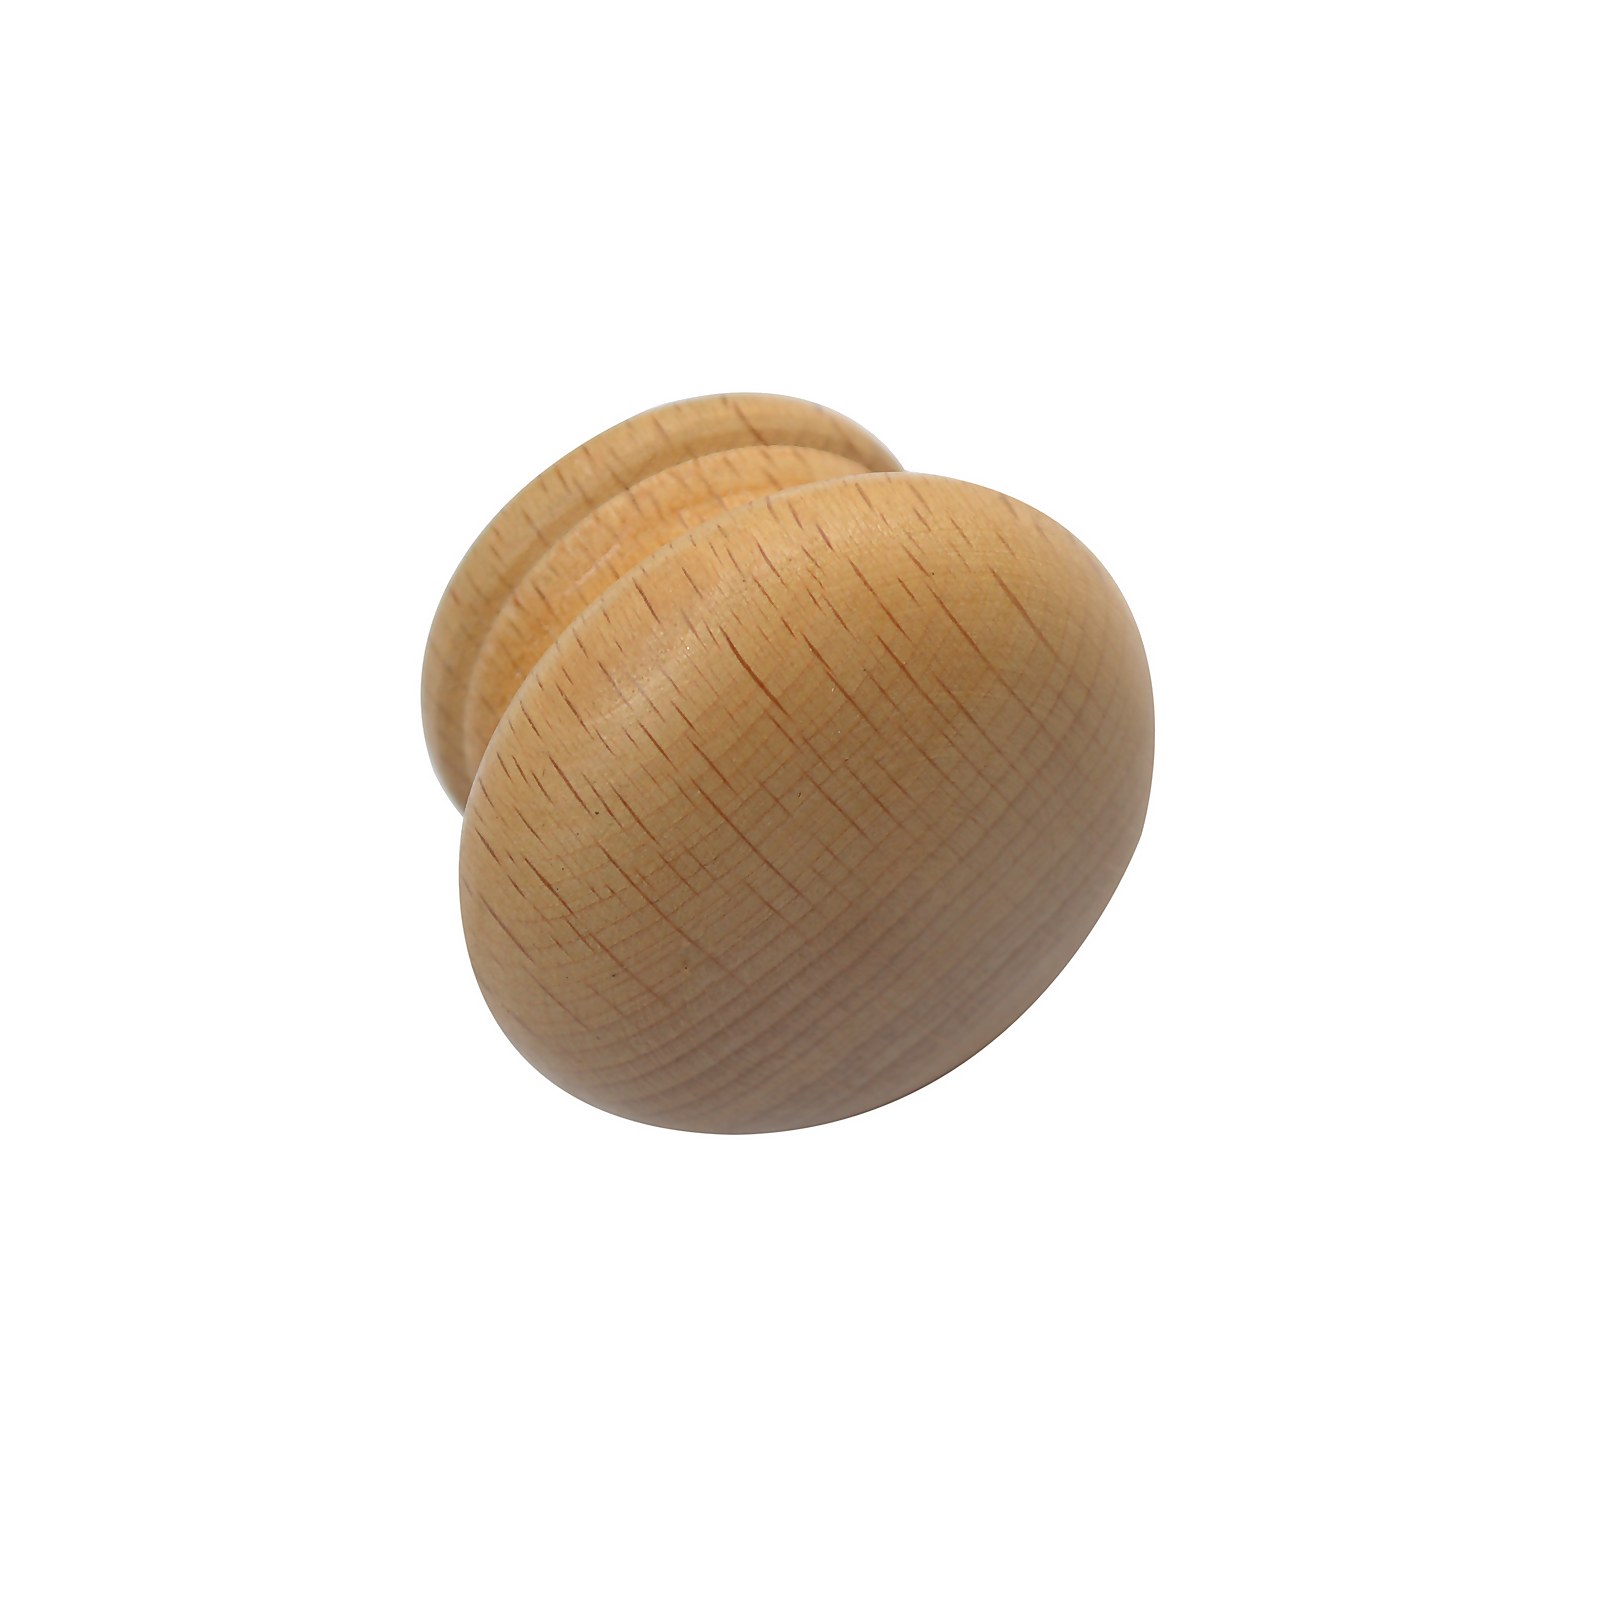 Photo of Beech 35mm Natural Wooden Cabinet Knob - 2 Pack